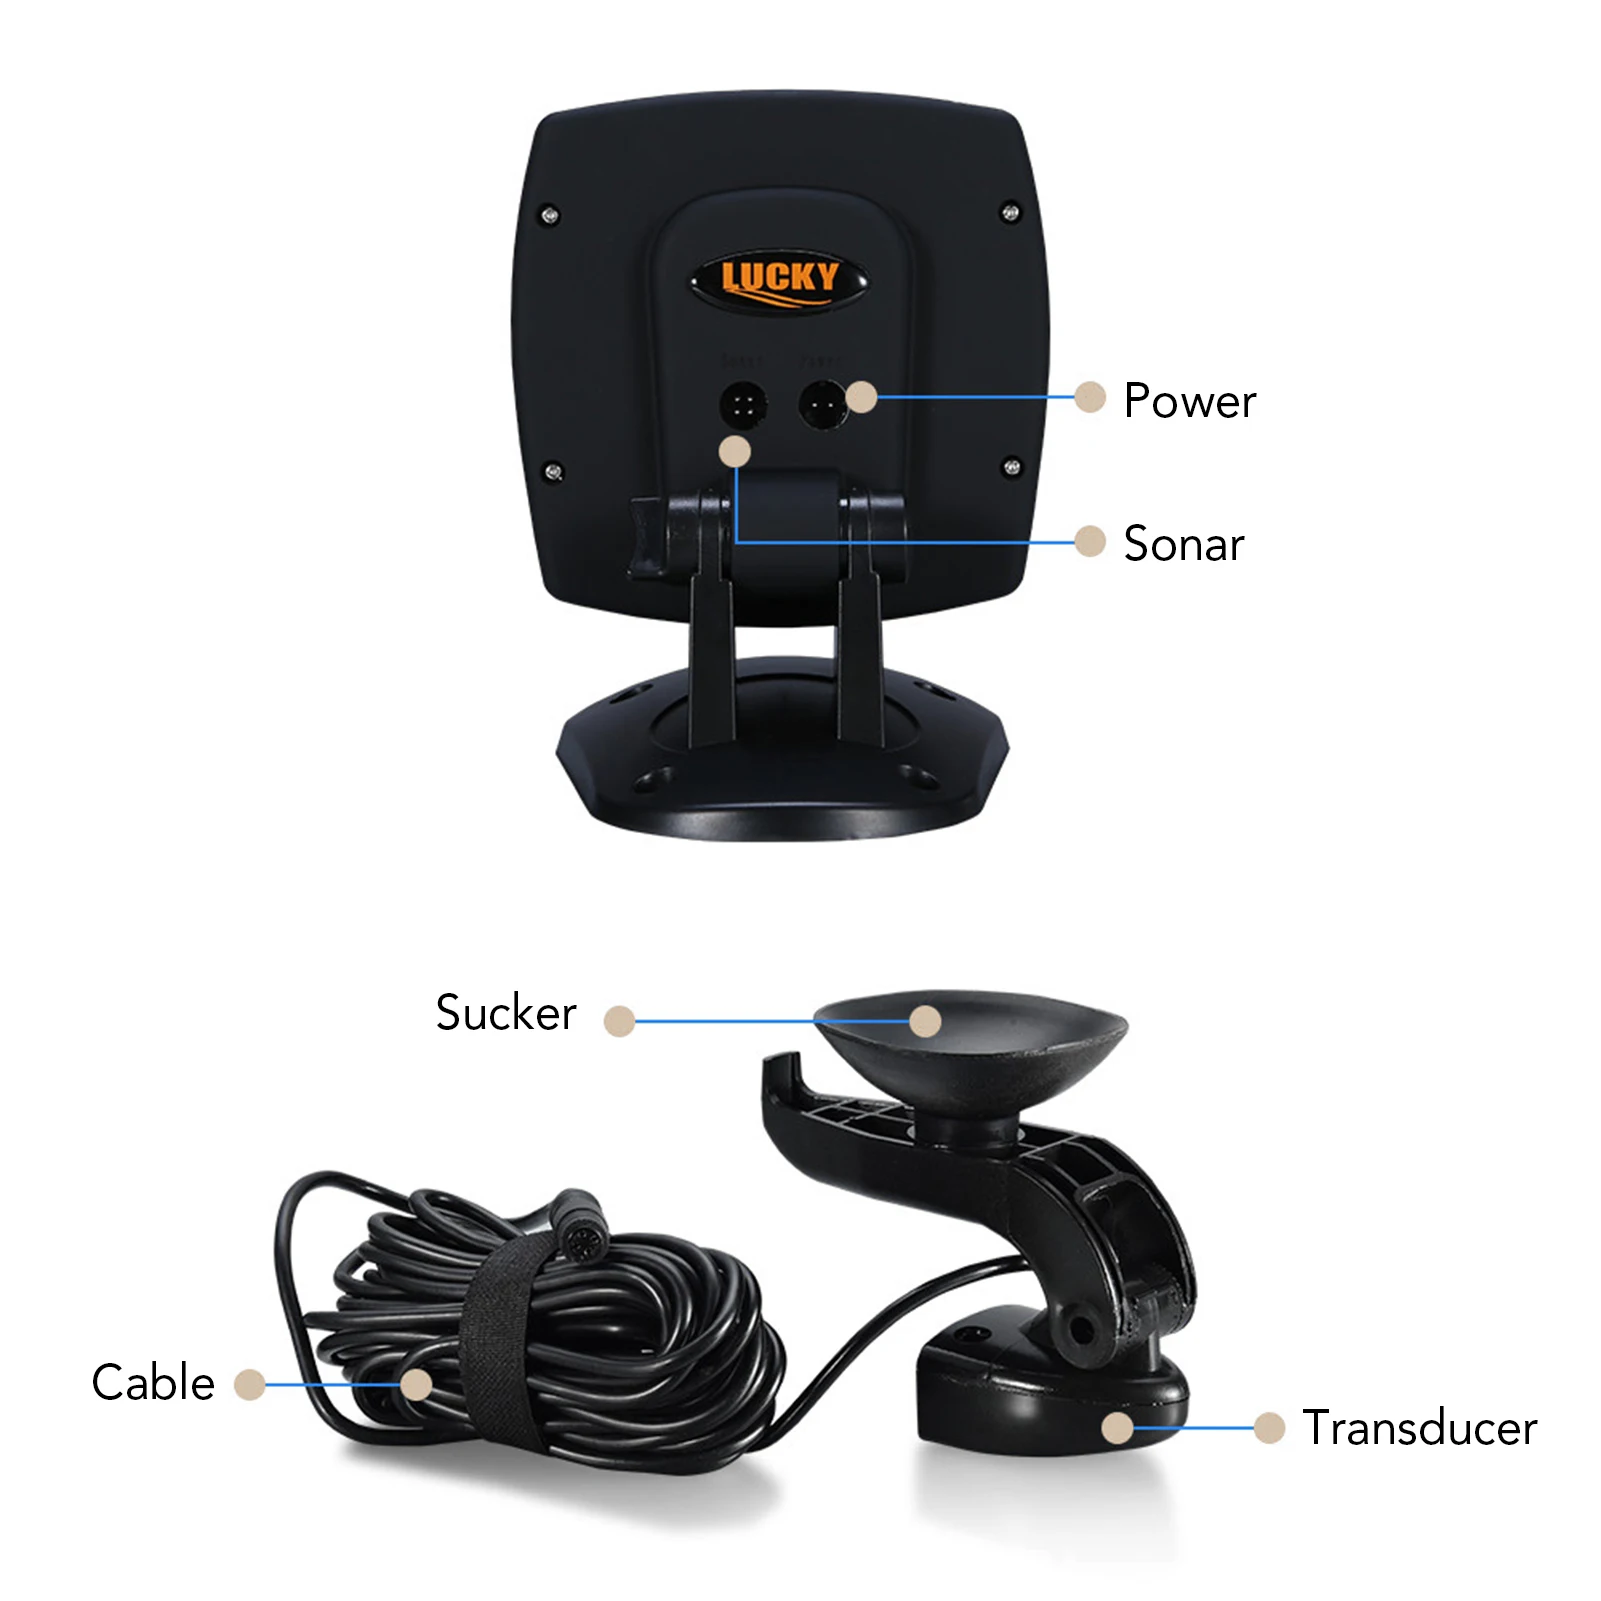 LUCKY Wired Fishing Finder 540ft/180m Depth Sounder Fish Detector F918-C180S Echo Sounder Locator Boat Fishfinder from a boat enlarge